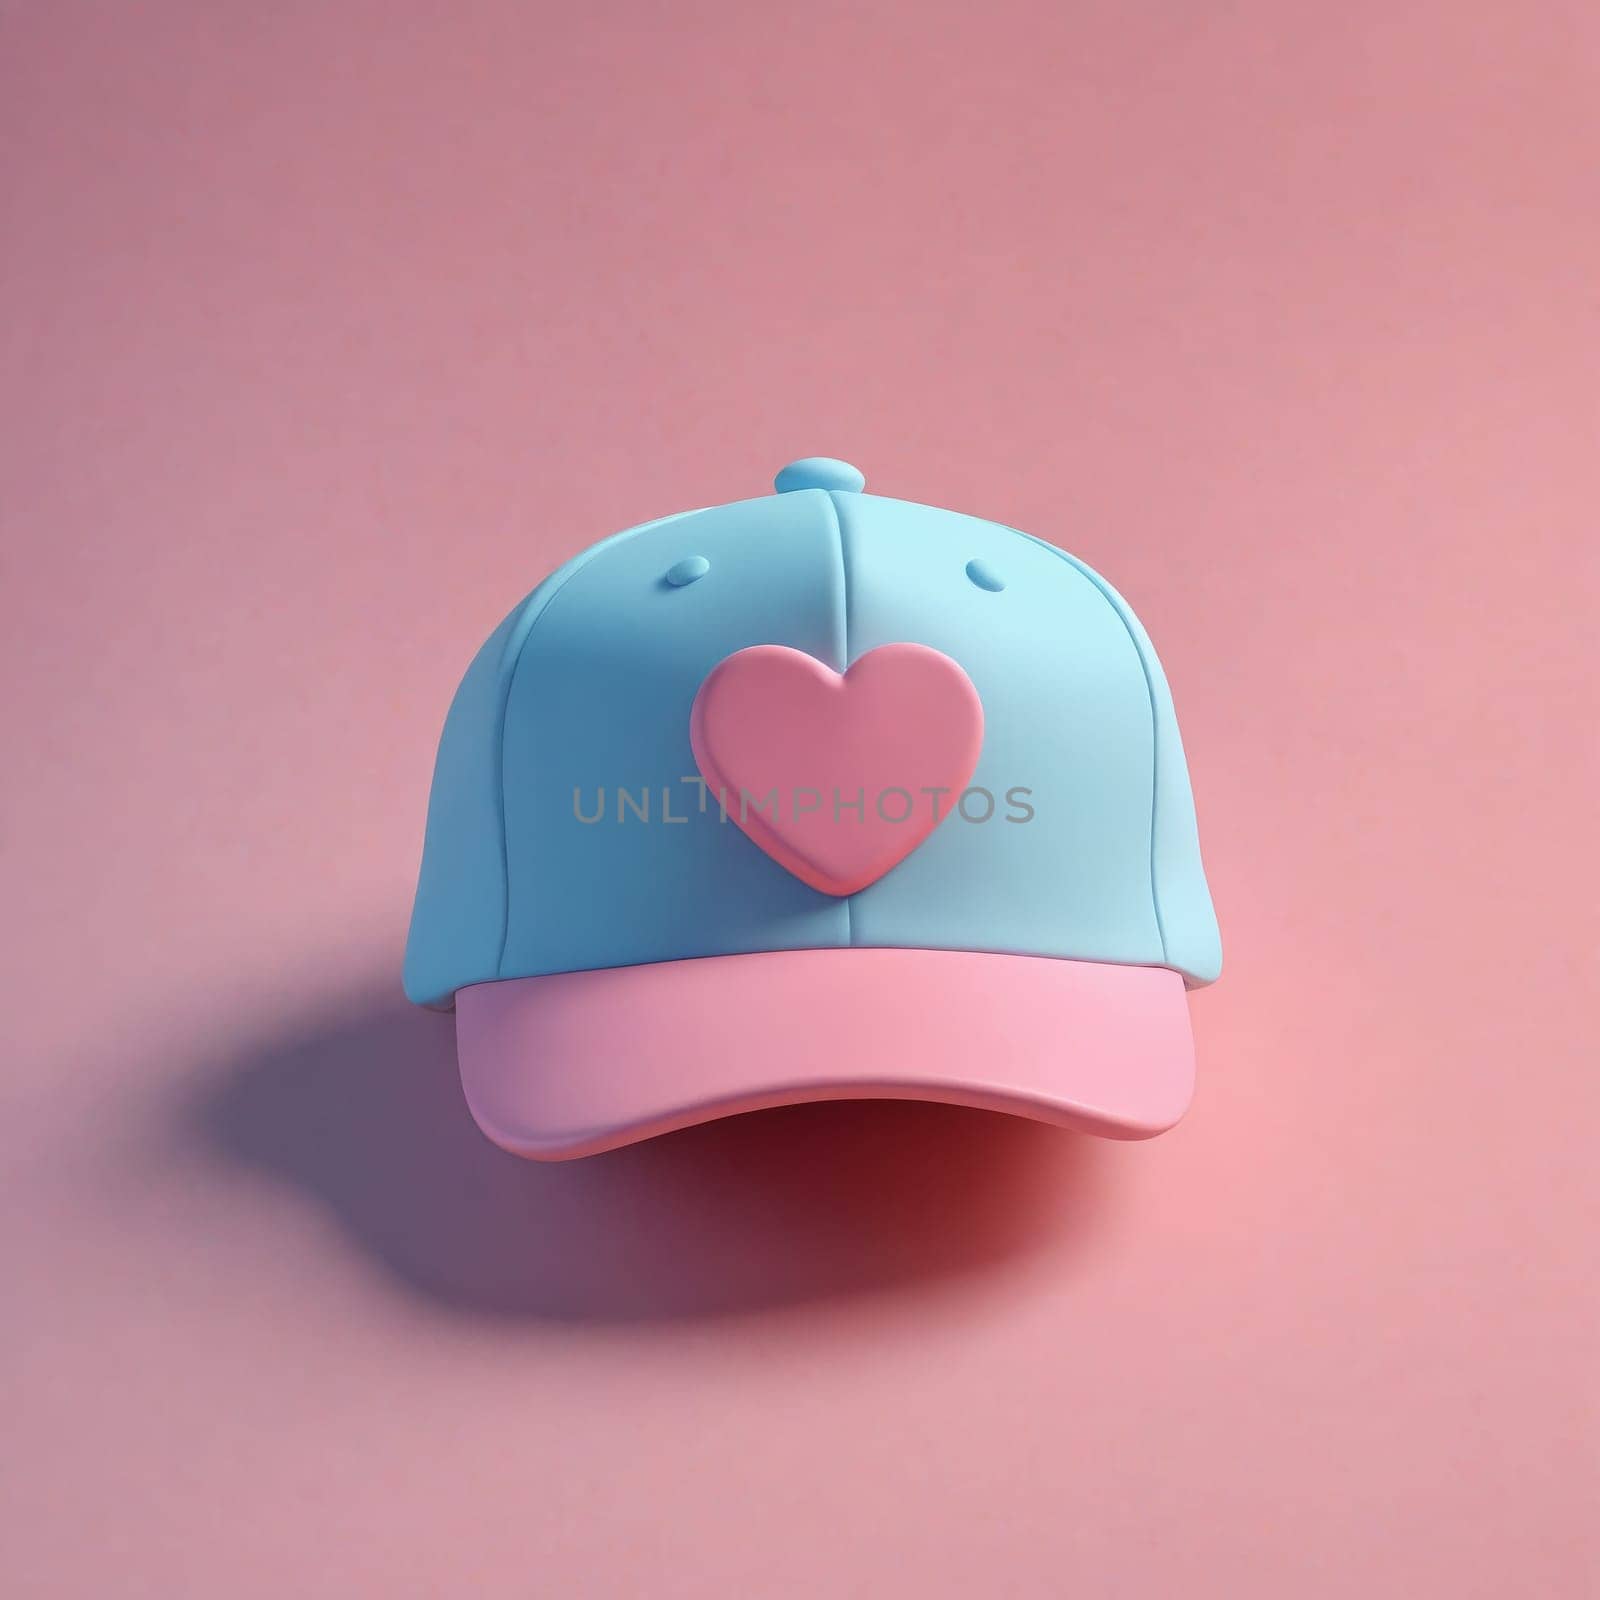 A cap in pink with a cute cloud and heart design, matched with a similarly colored surface.